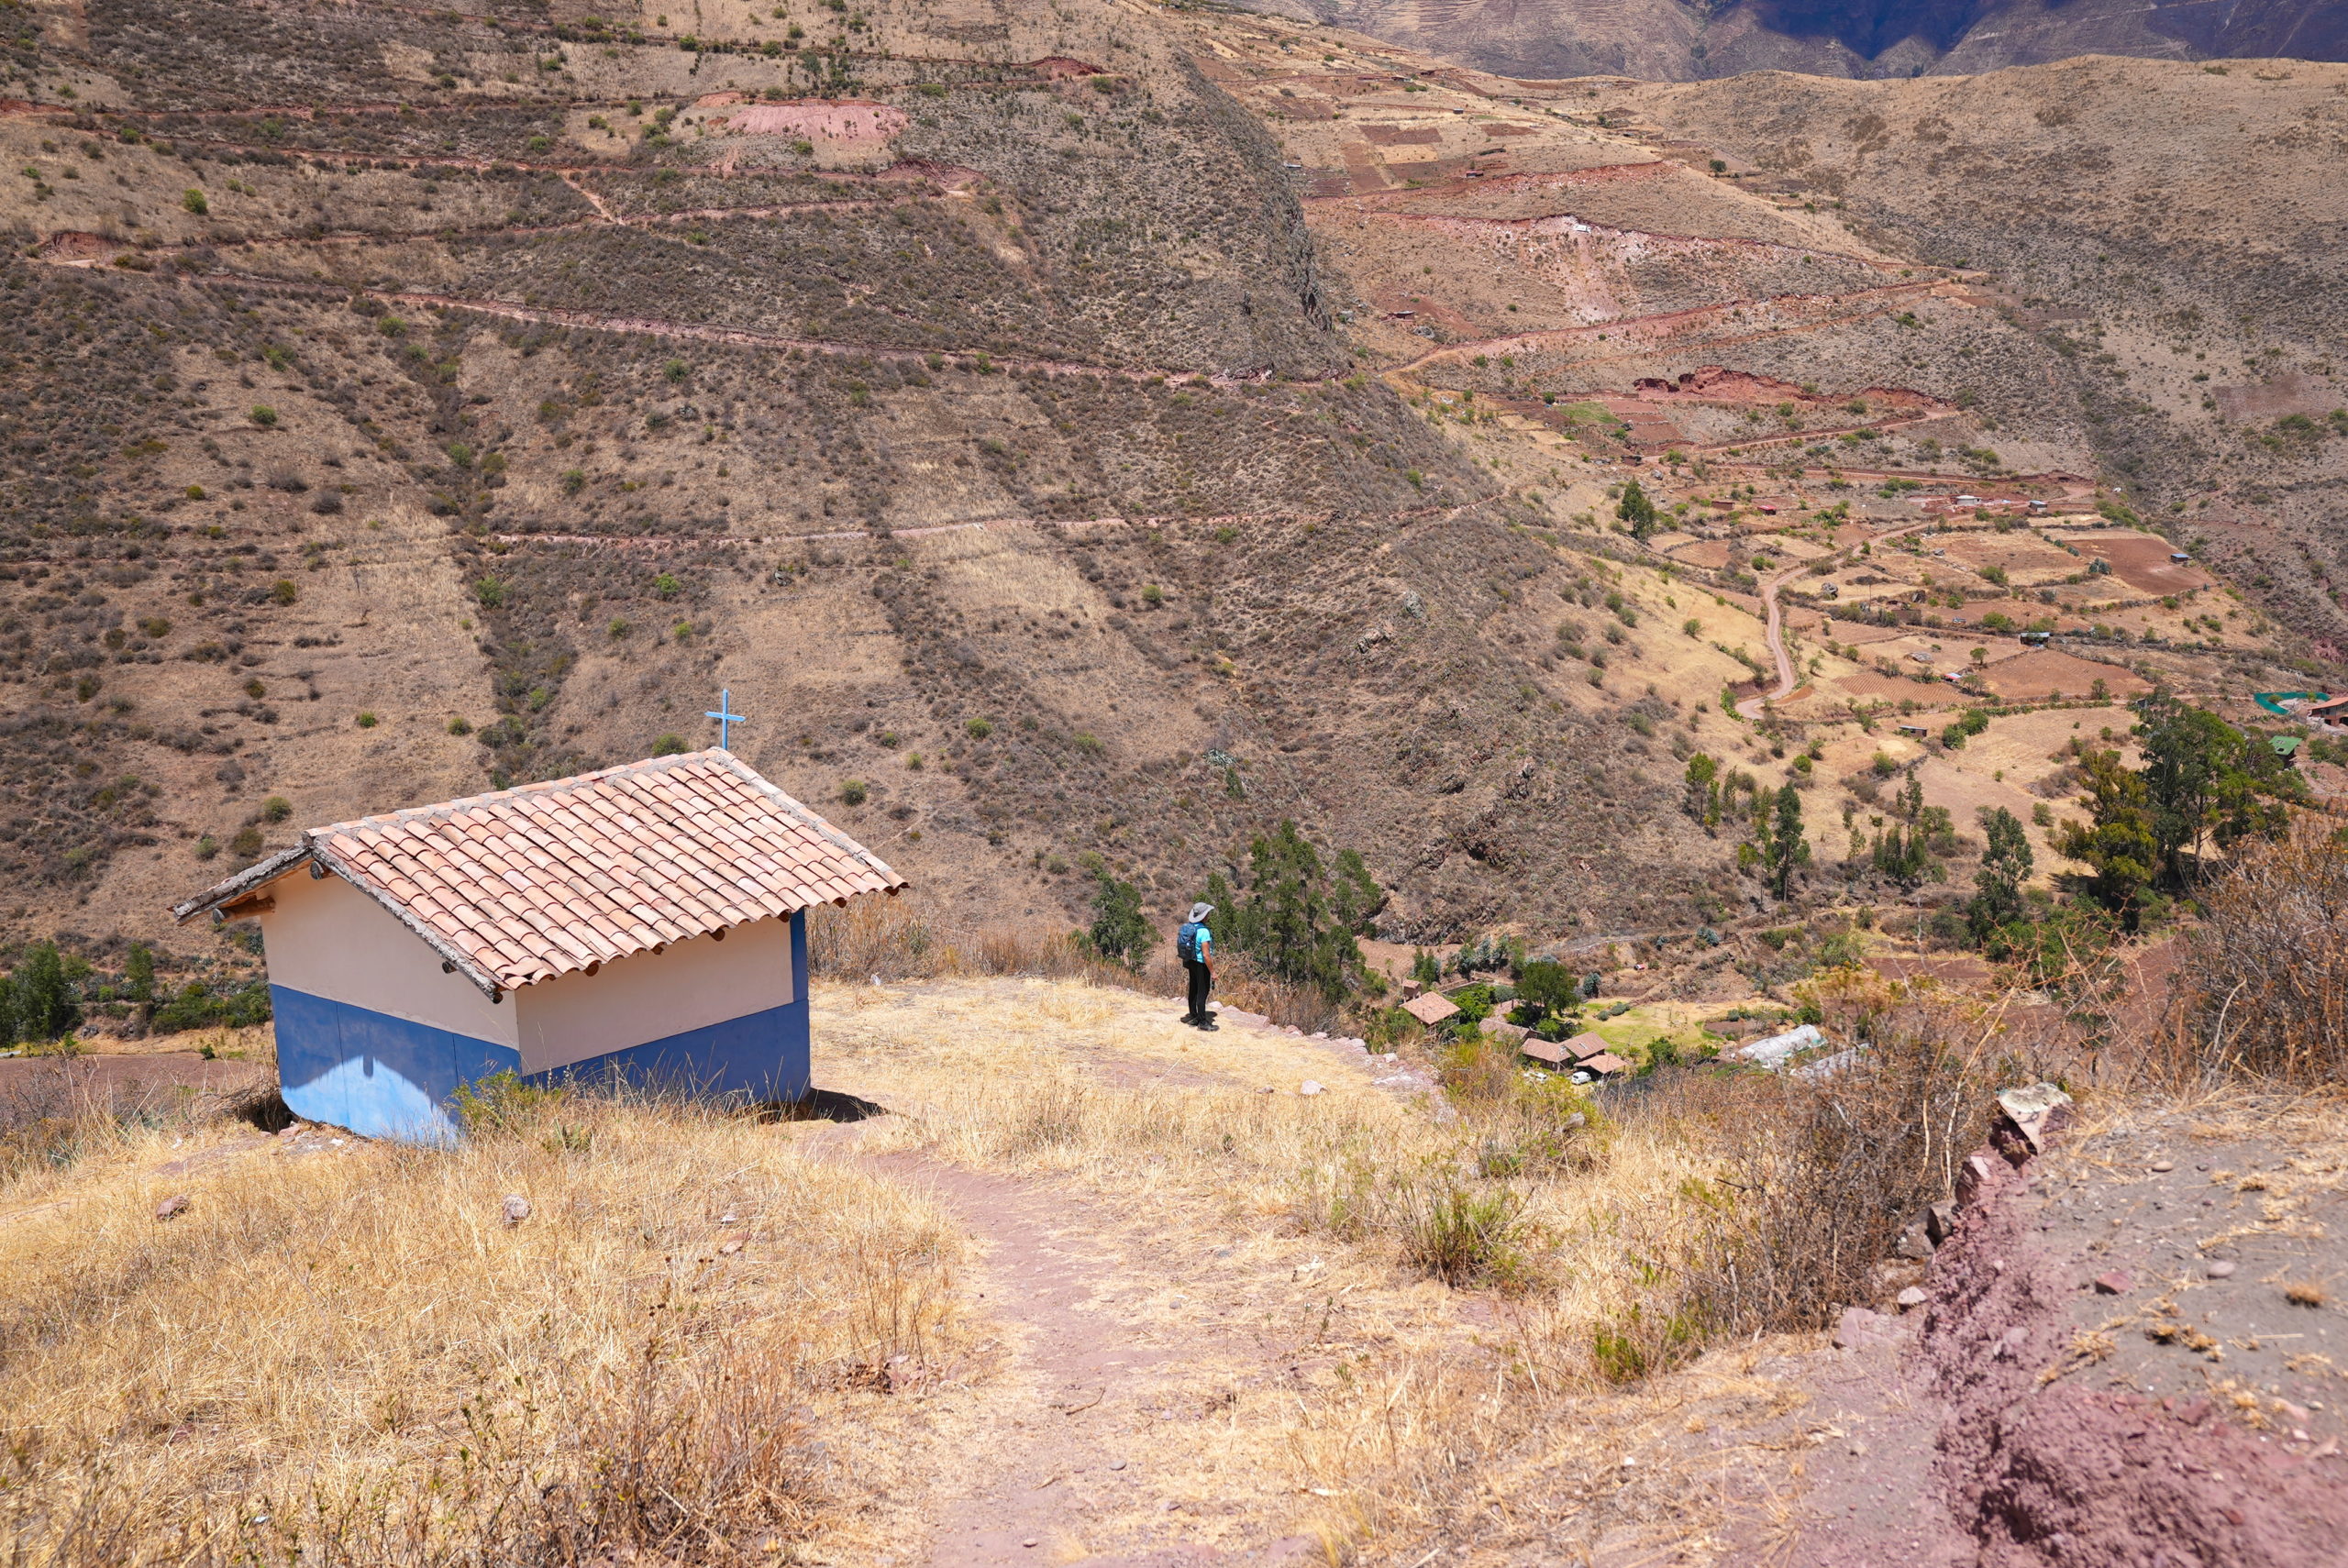 Hiking in the Andes.